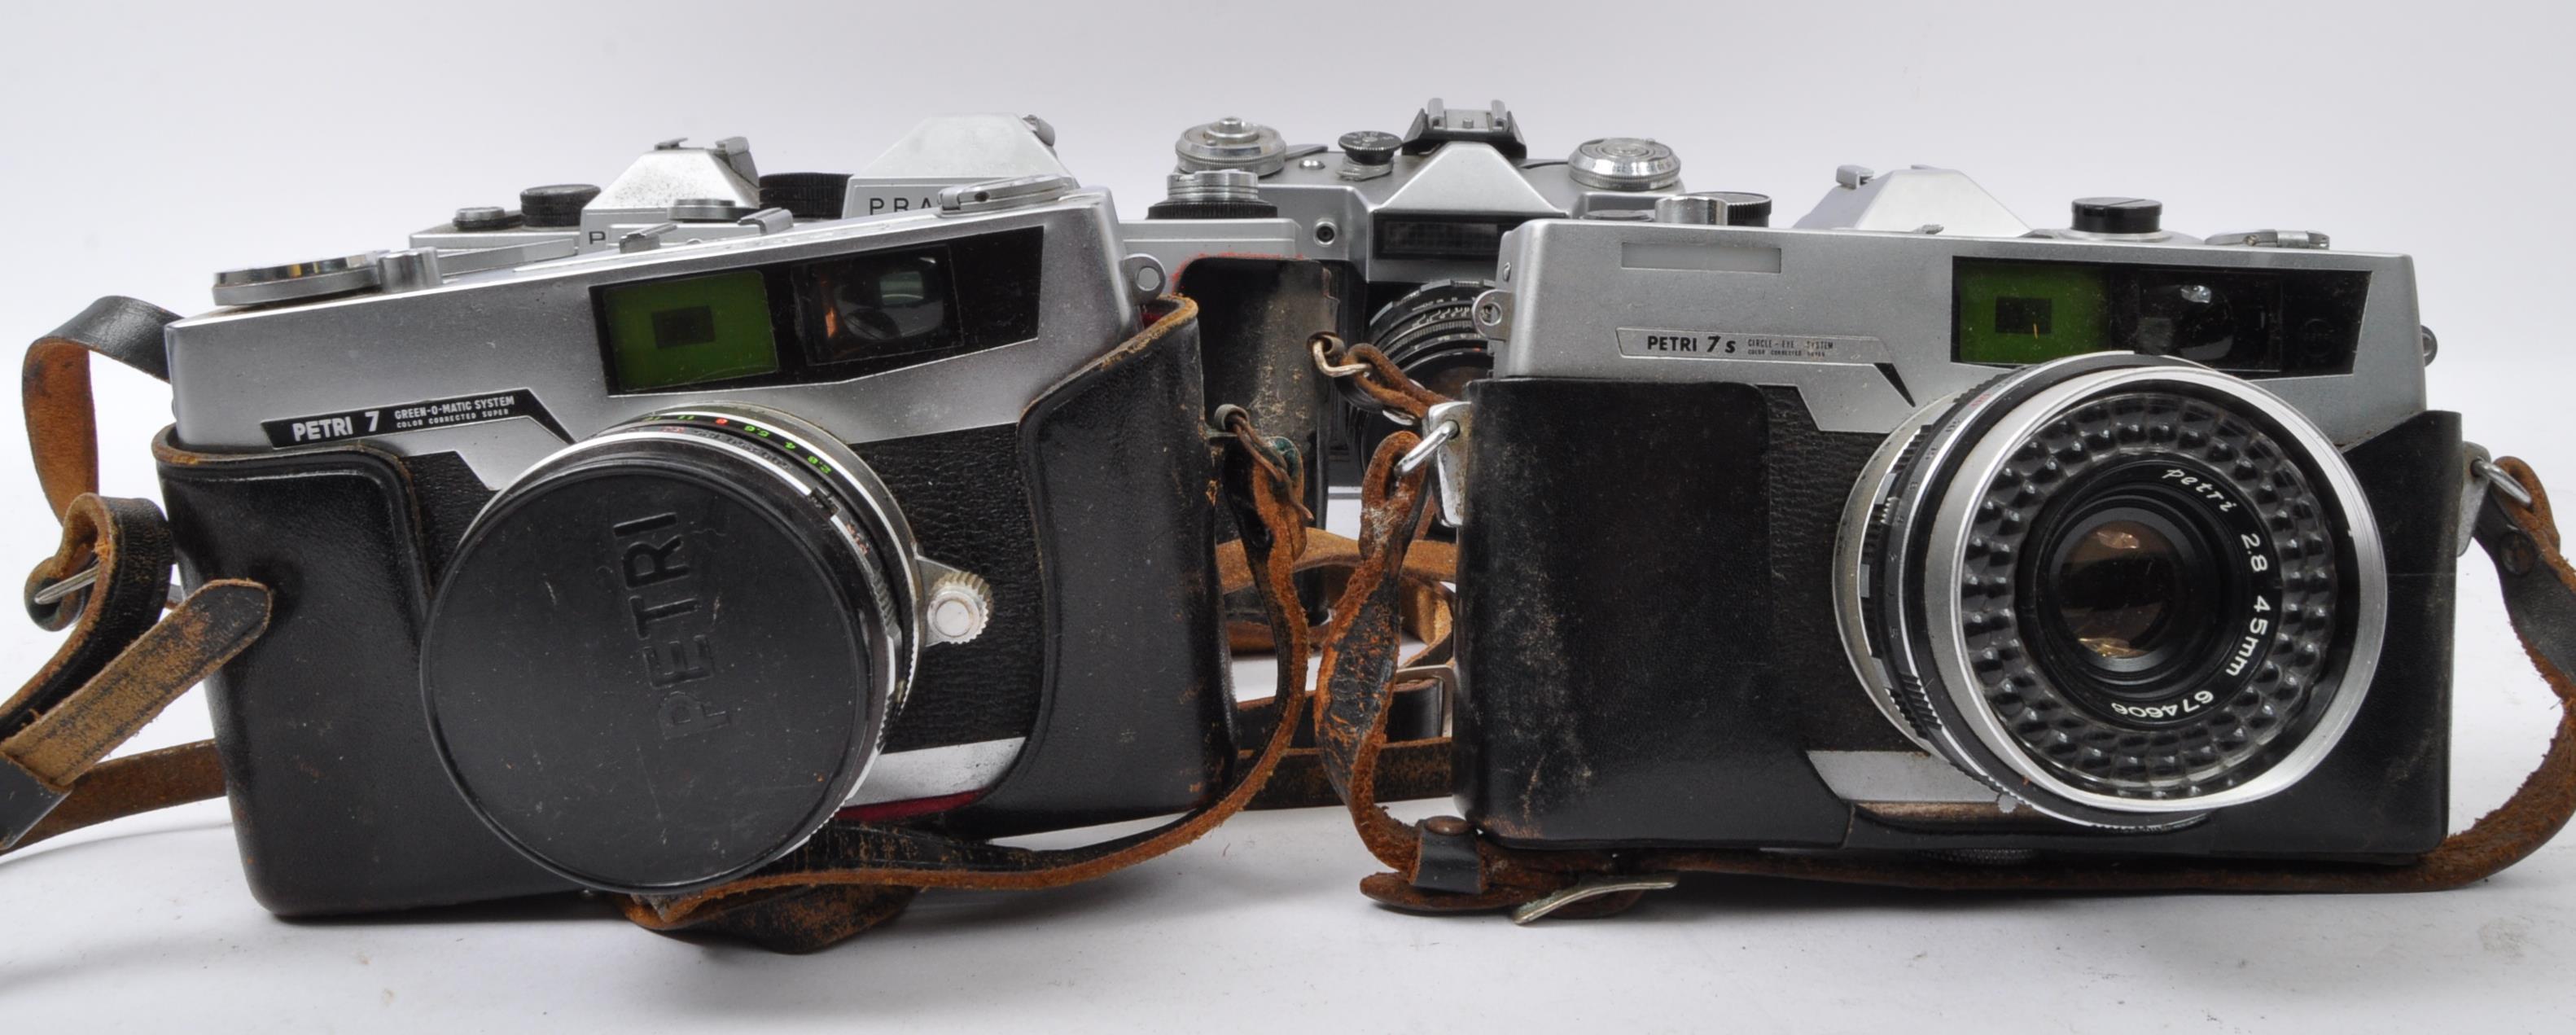 COLLECTION OF 20TH CENTURY CAMERAS & LENSES - Image 4 of 6